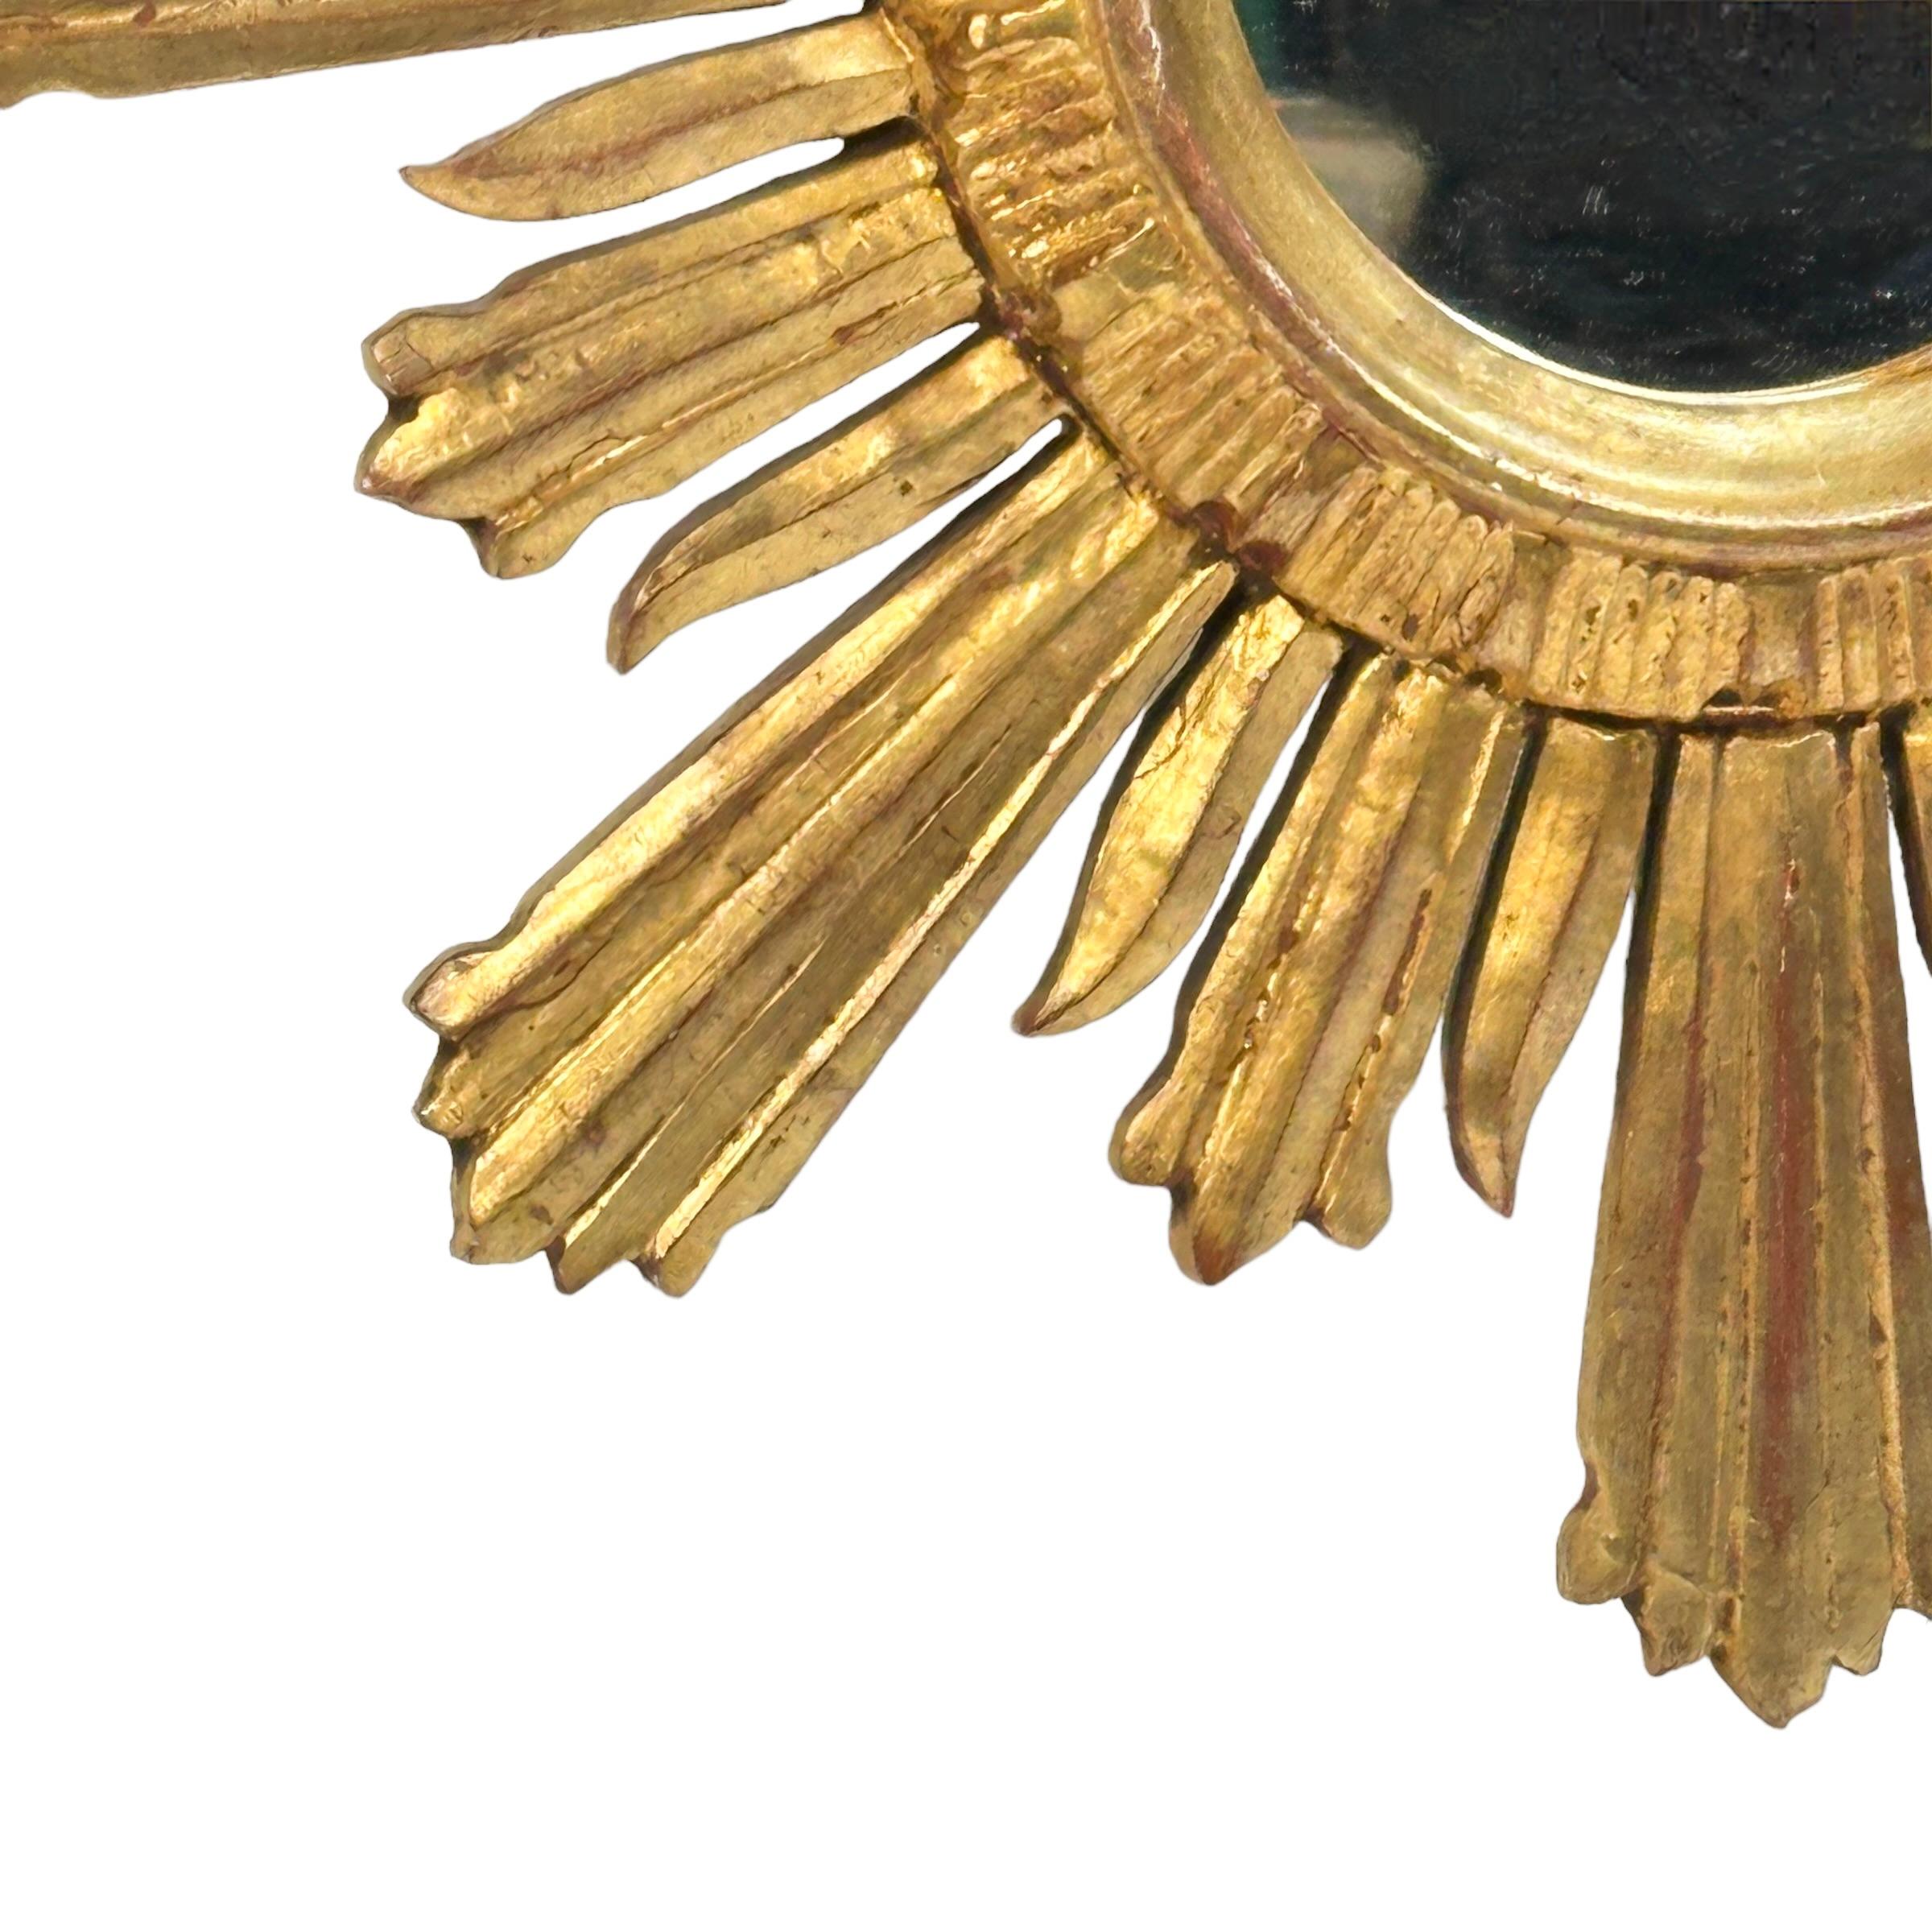 A beautiful starburst sunburst mirror. Made of gilded wood. It measures approximate 18.63